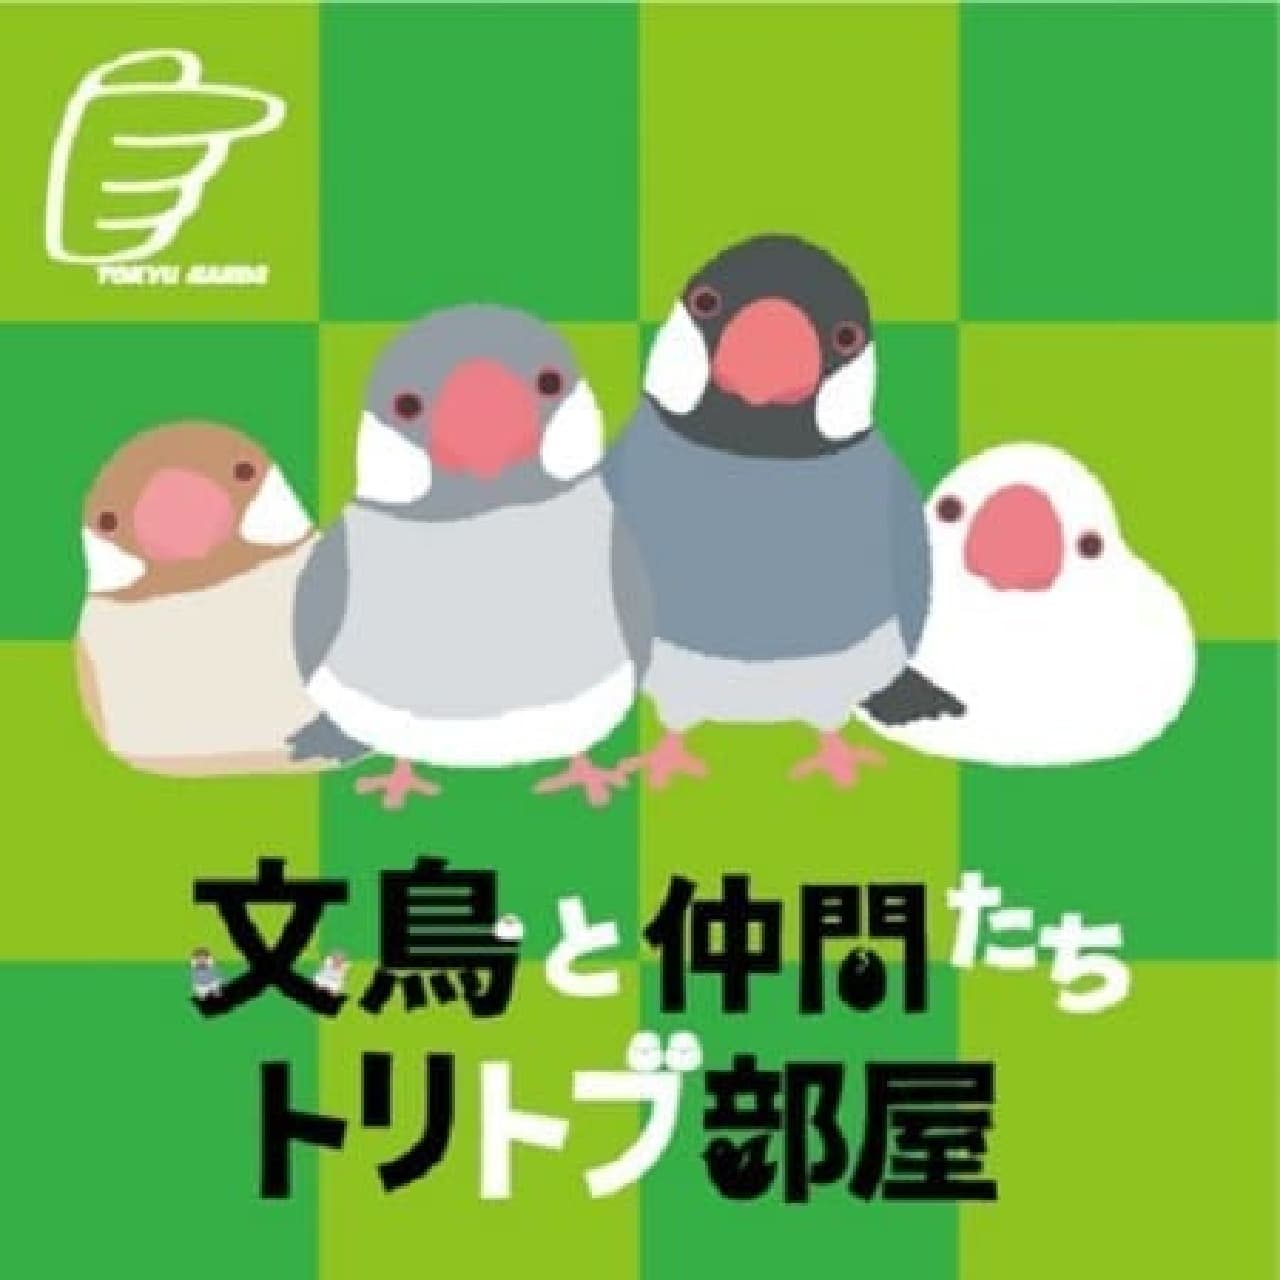 For cherry blossoms and white, if you like Java sparrows, go to Ikebukuro Hands!